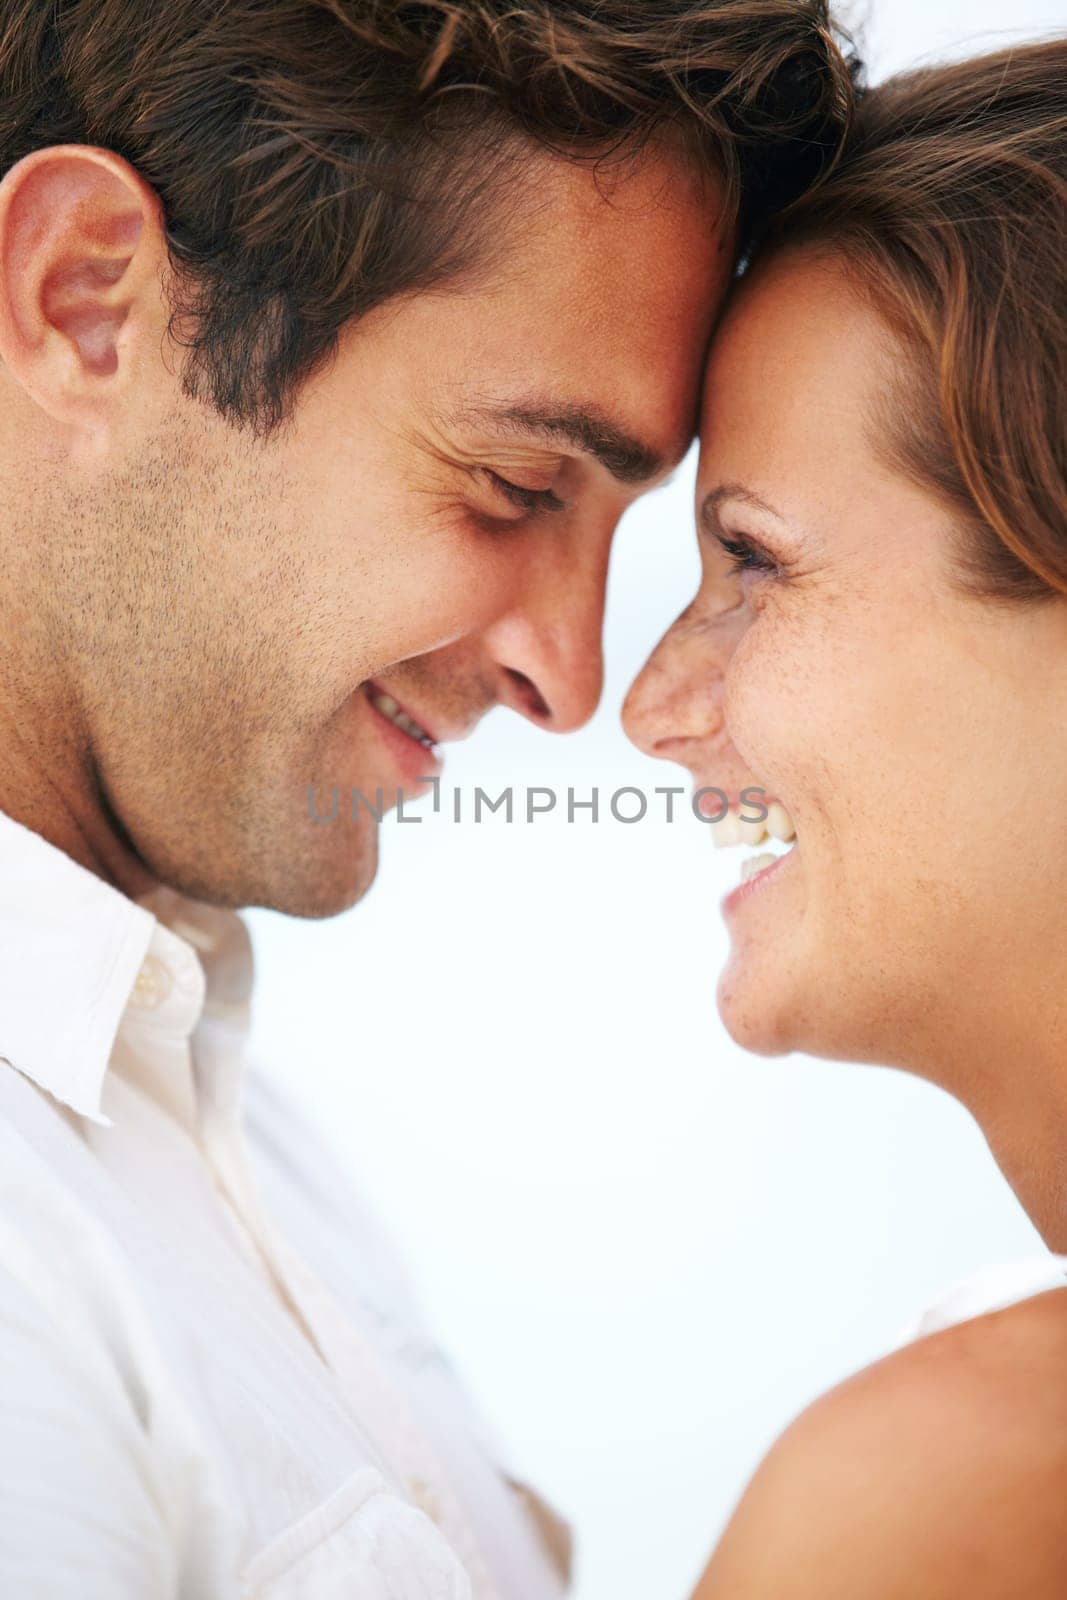 Happy couple, nose touch and love in outdoor for romantic and travel on honeymoon by sky background. Man, woman and face together for bonding with care, peace and smile for commitment in marriage.